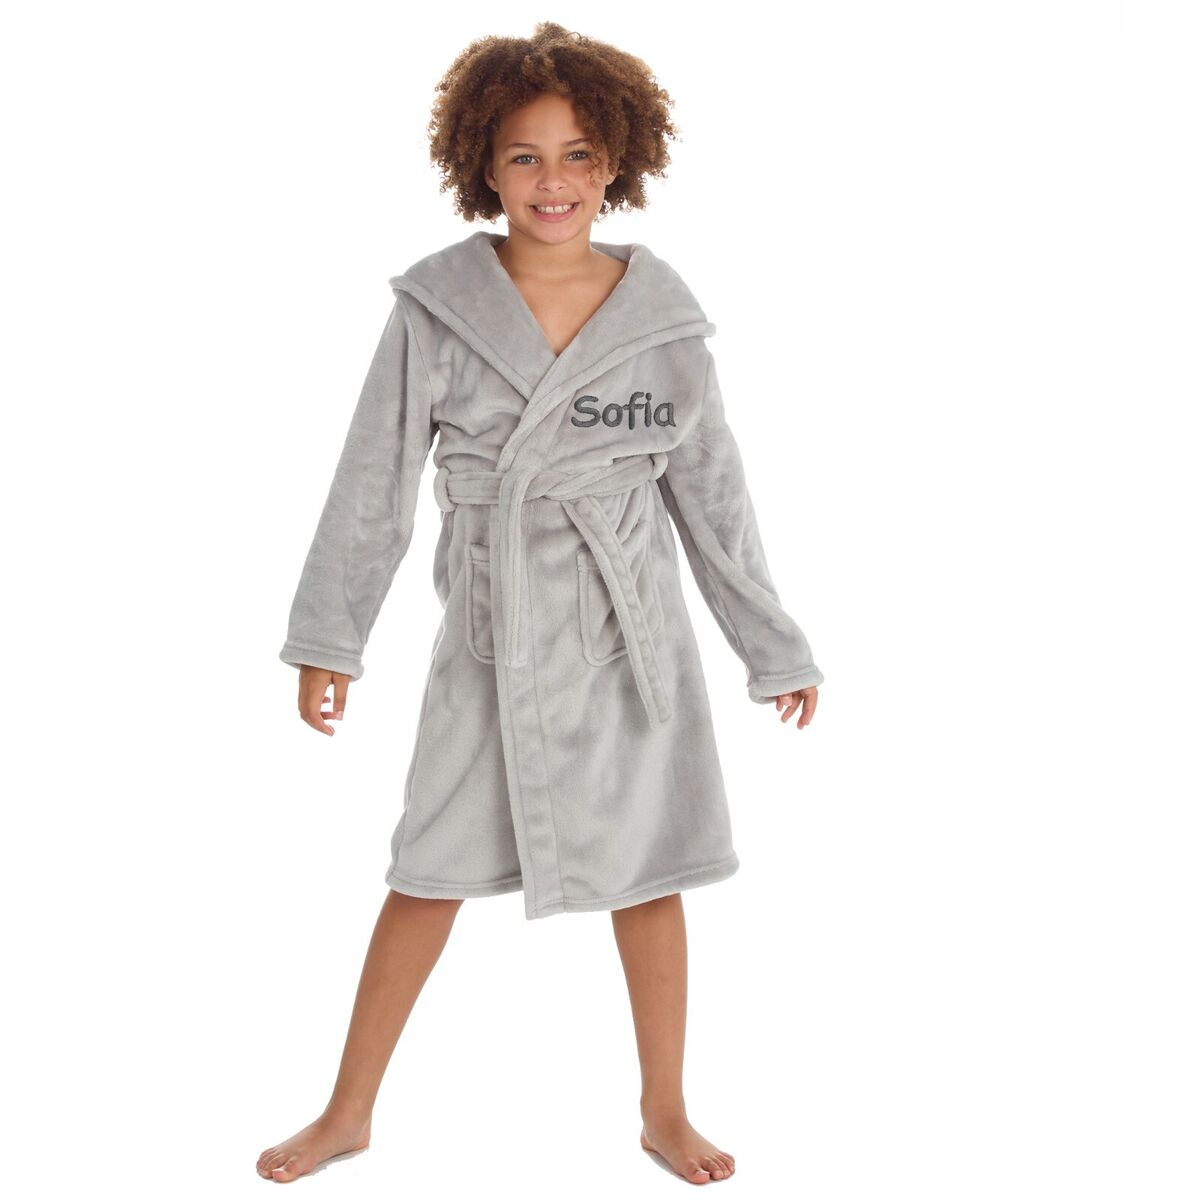 Comfy Co Dressing Gown Child - Get Branded Workwear